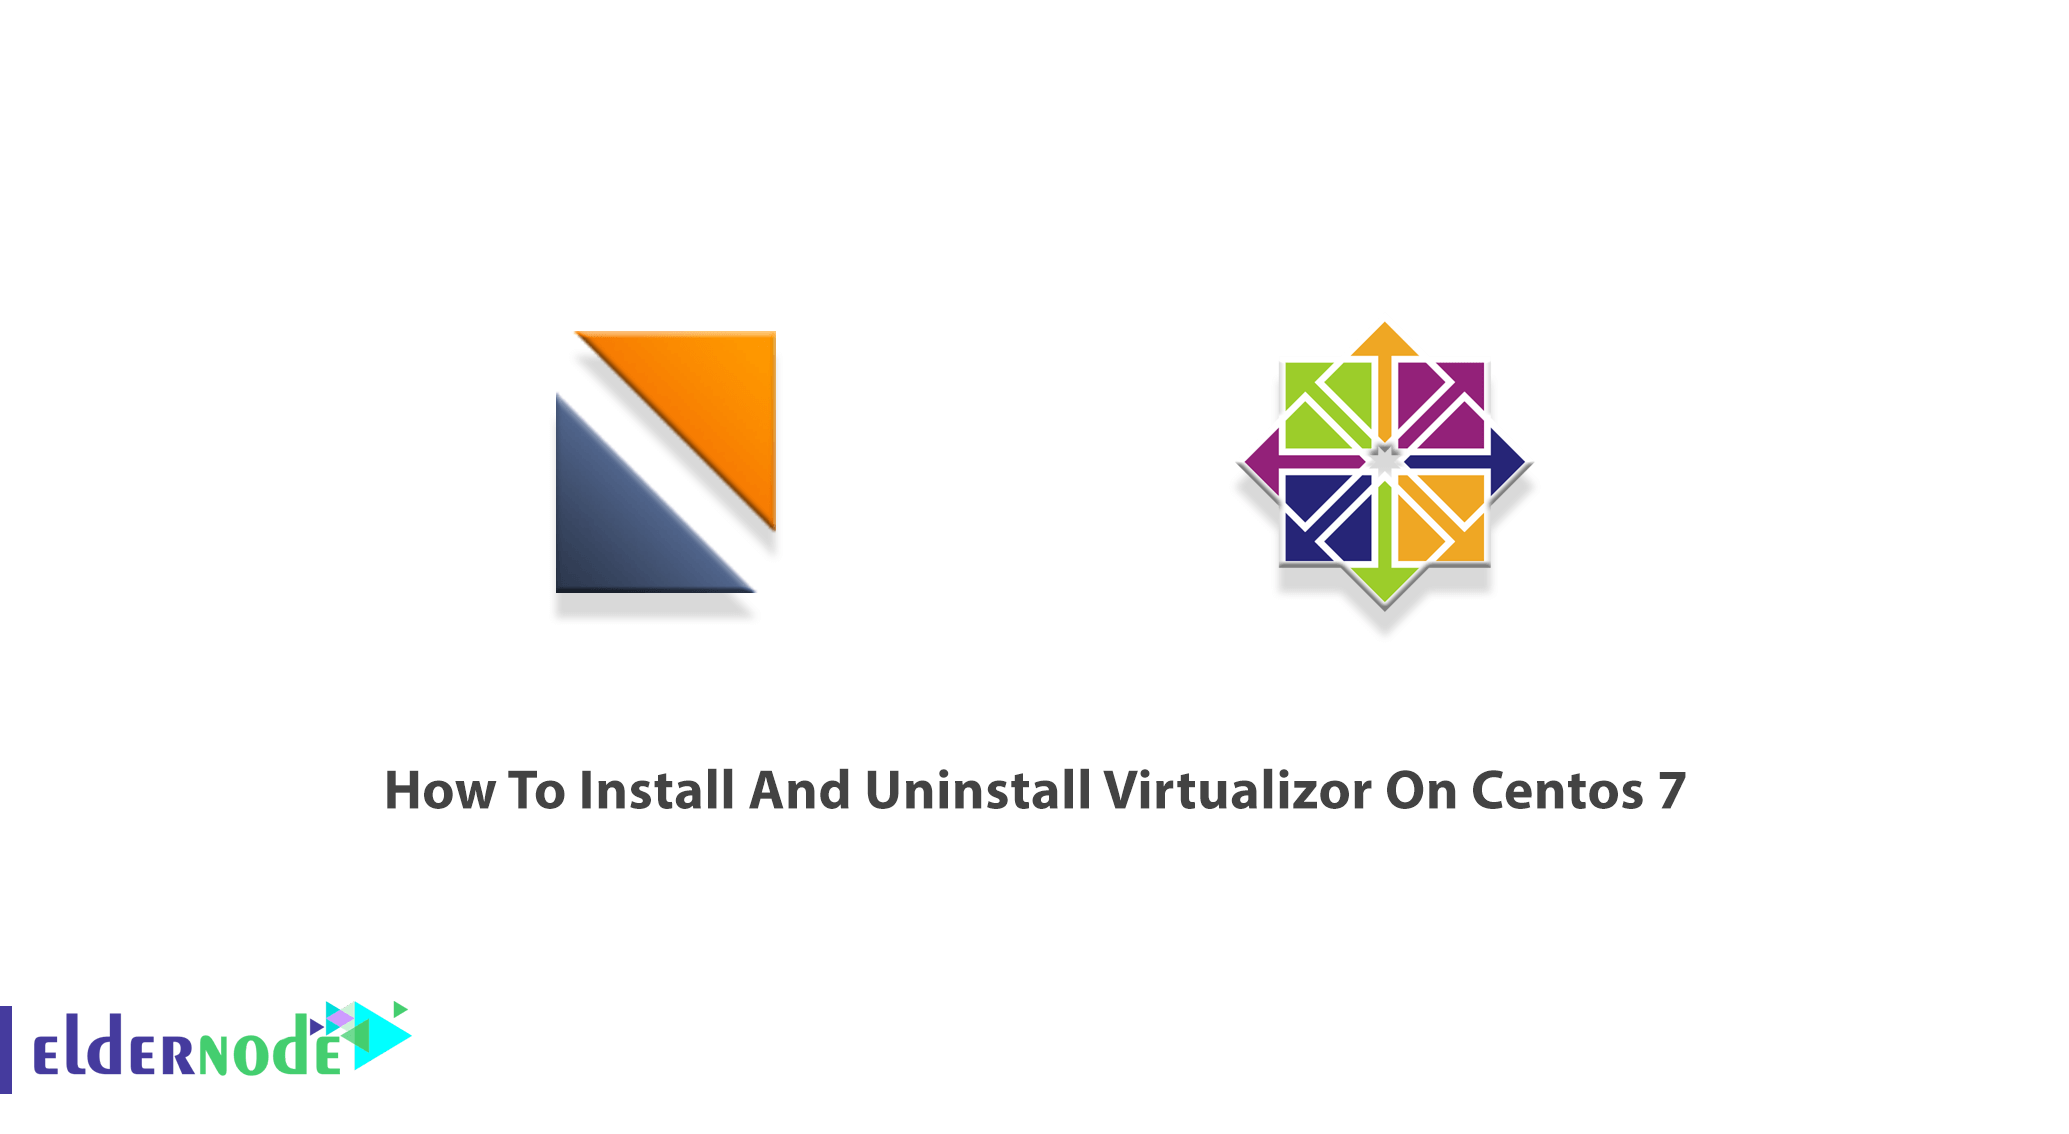 How To Install And Uninstall Virtualizor On Centos 7